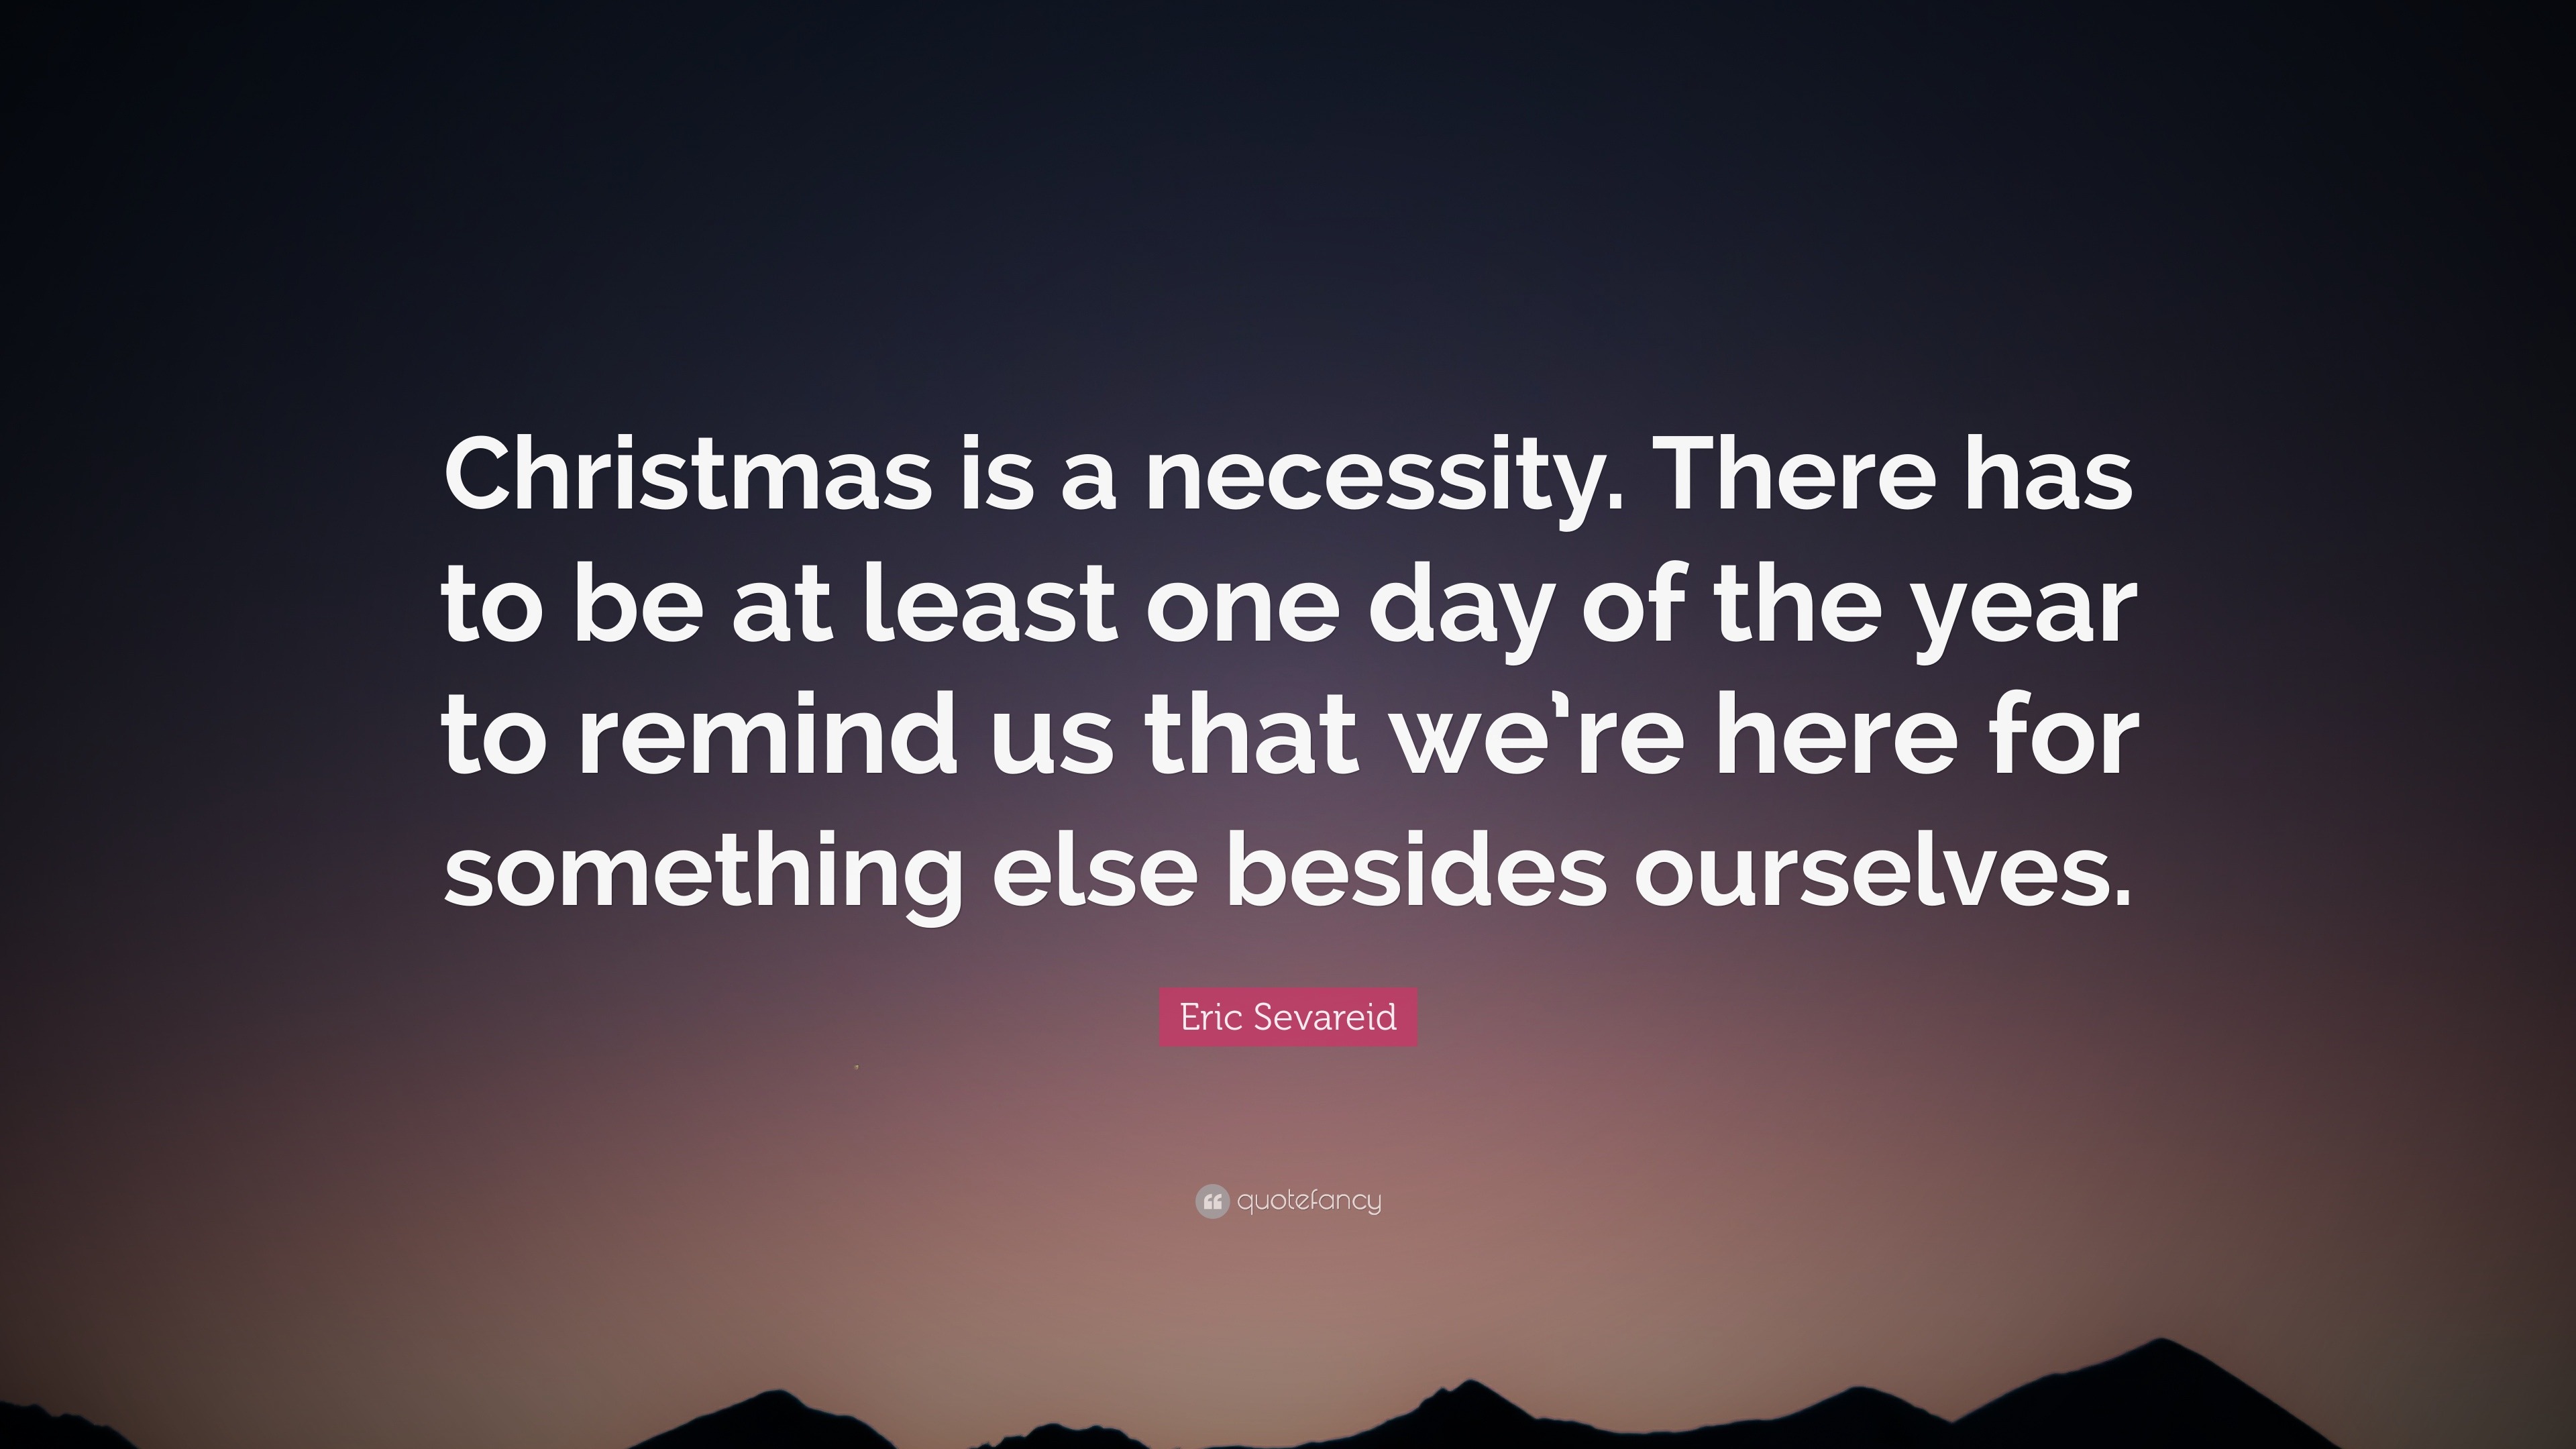 Eric Sevareid Quote: “Christmas is a necessity. There has to be at ...